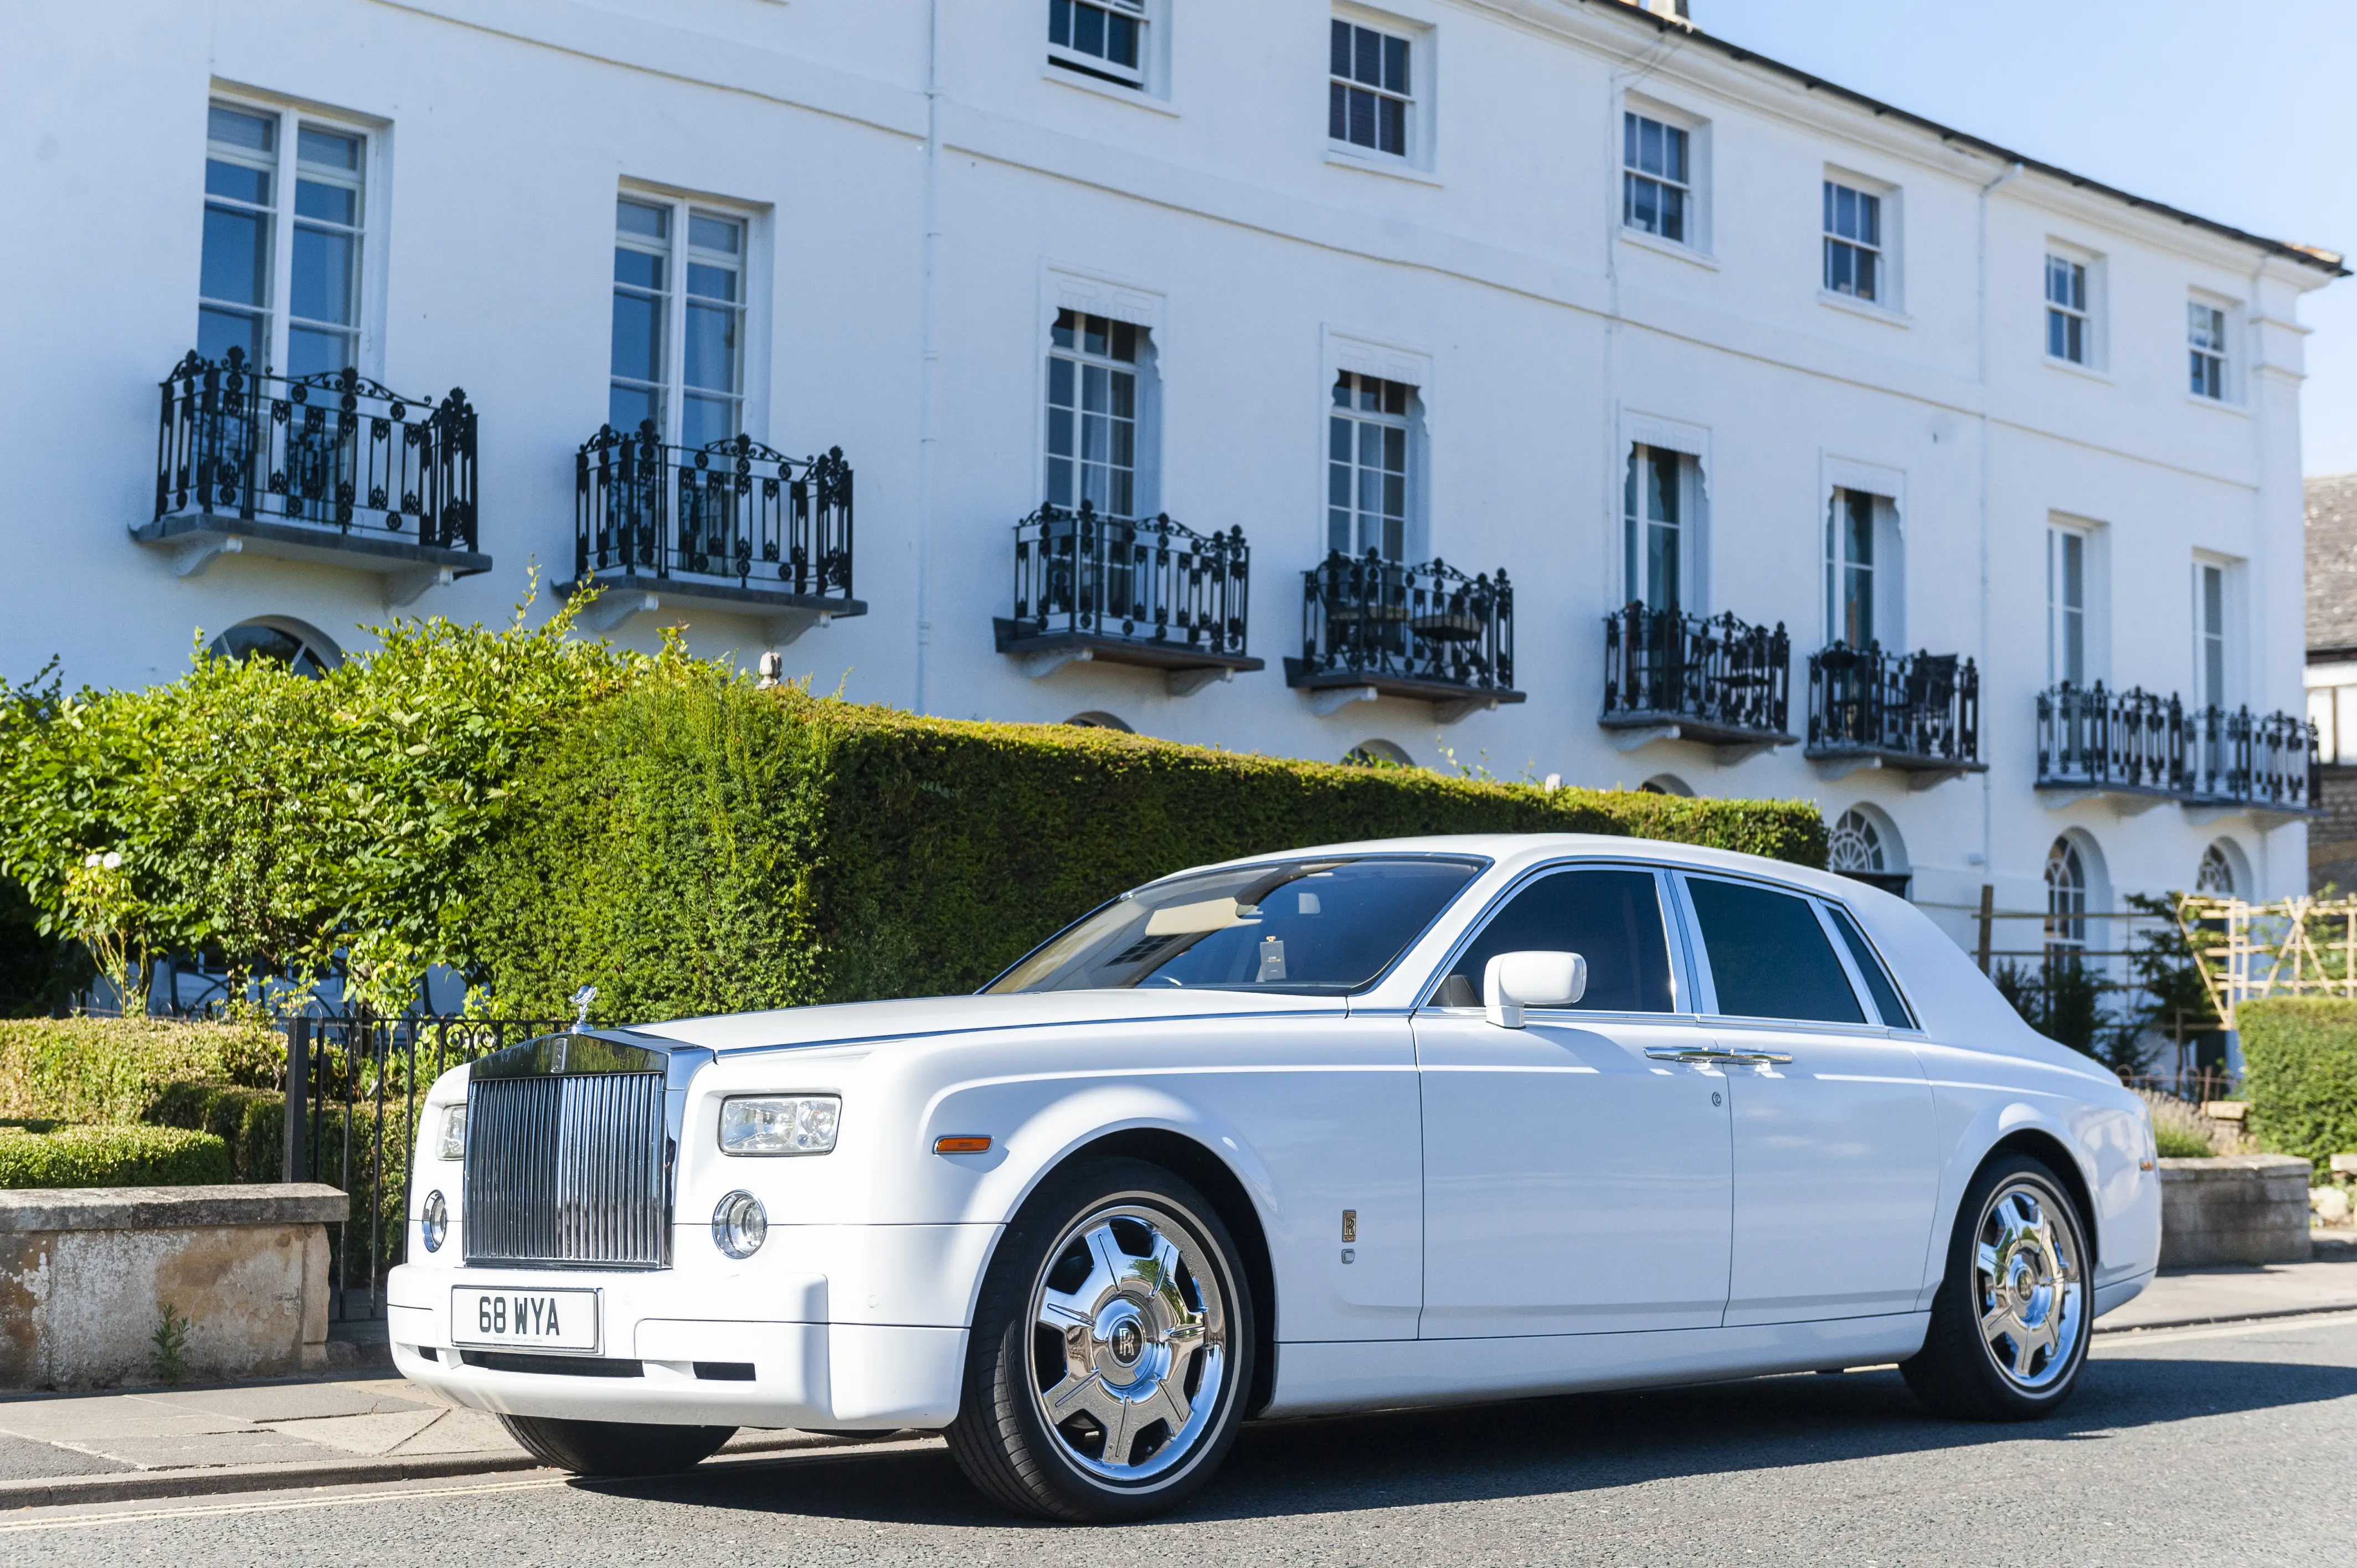 Introduction to the White Rolls Royce Phantom